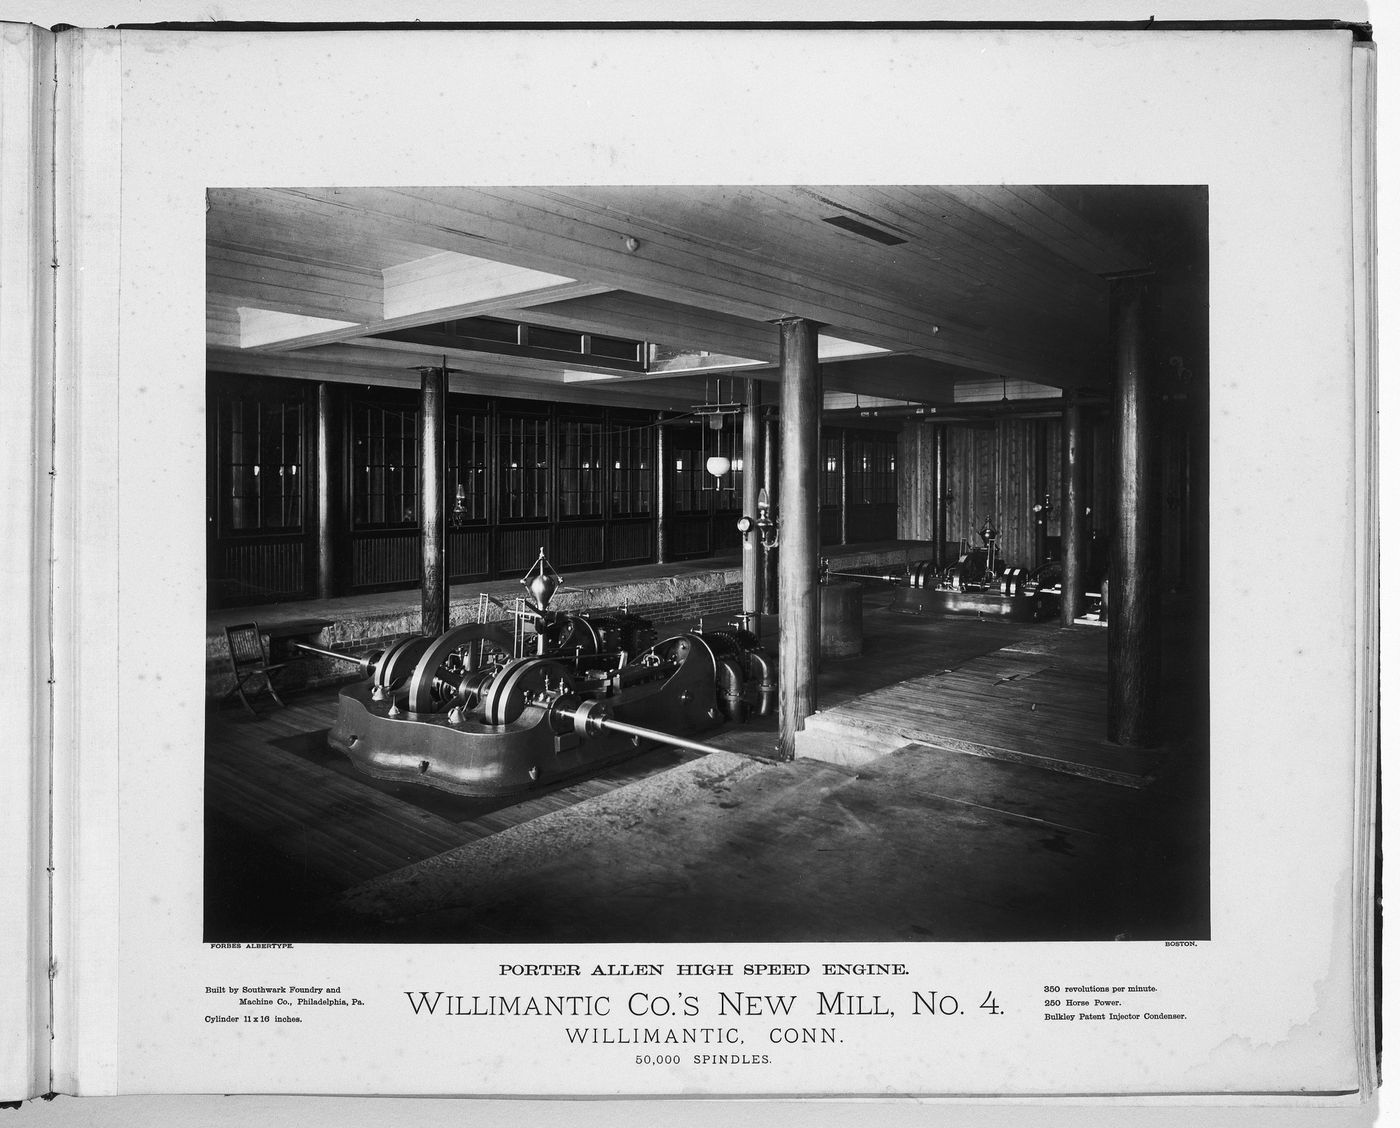 Interior view of the Porter Allen high speed engine in the Willimantic Company’s new mill, no. 4, town of Willimantic, now Windham, Connecticut, United States